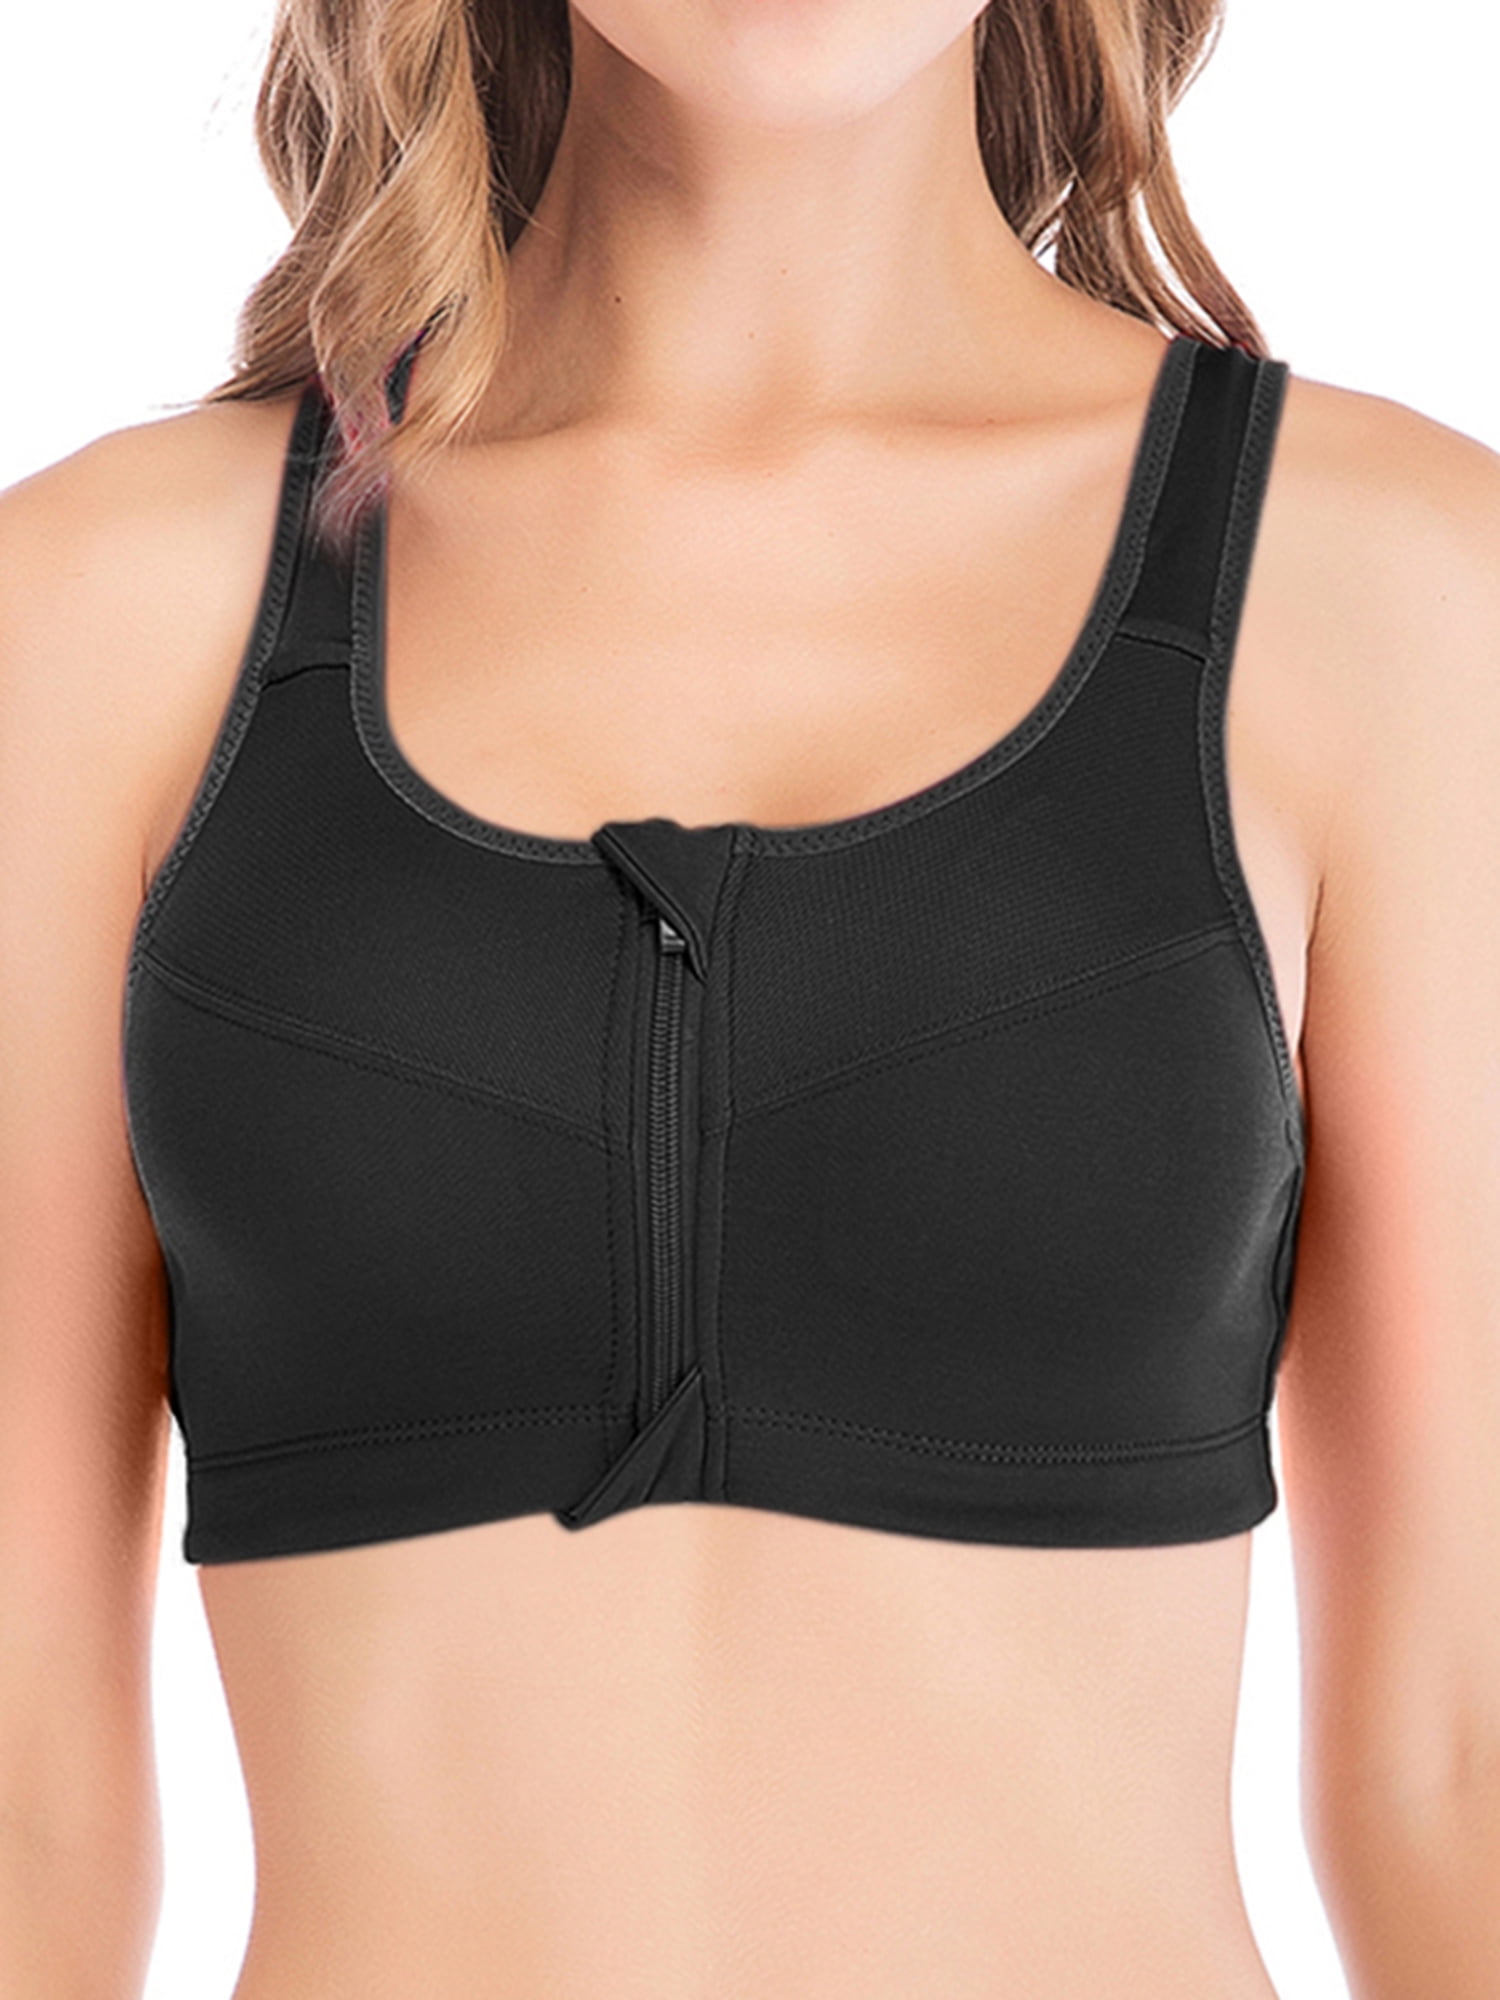 Women Front Zip Wireless Padded Cup Sports Bra High Impact Gym Active Tank Tops 